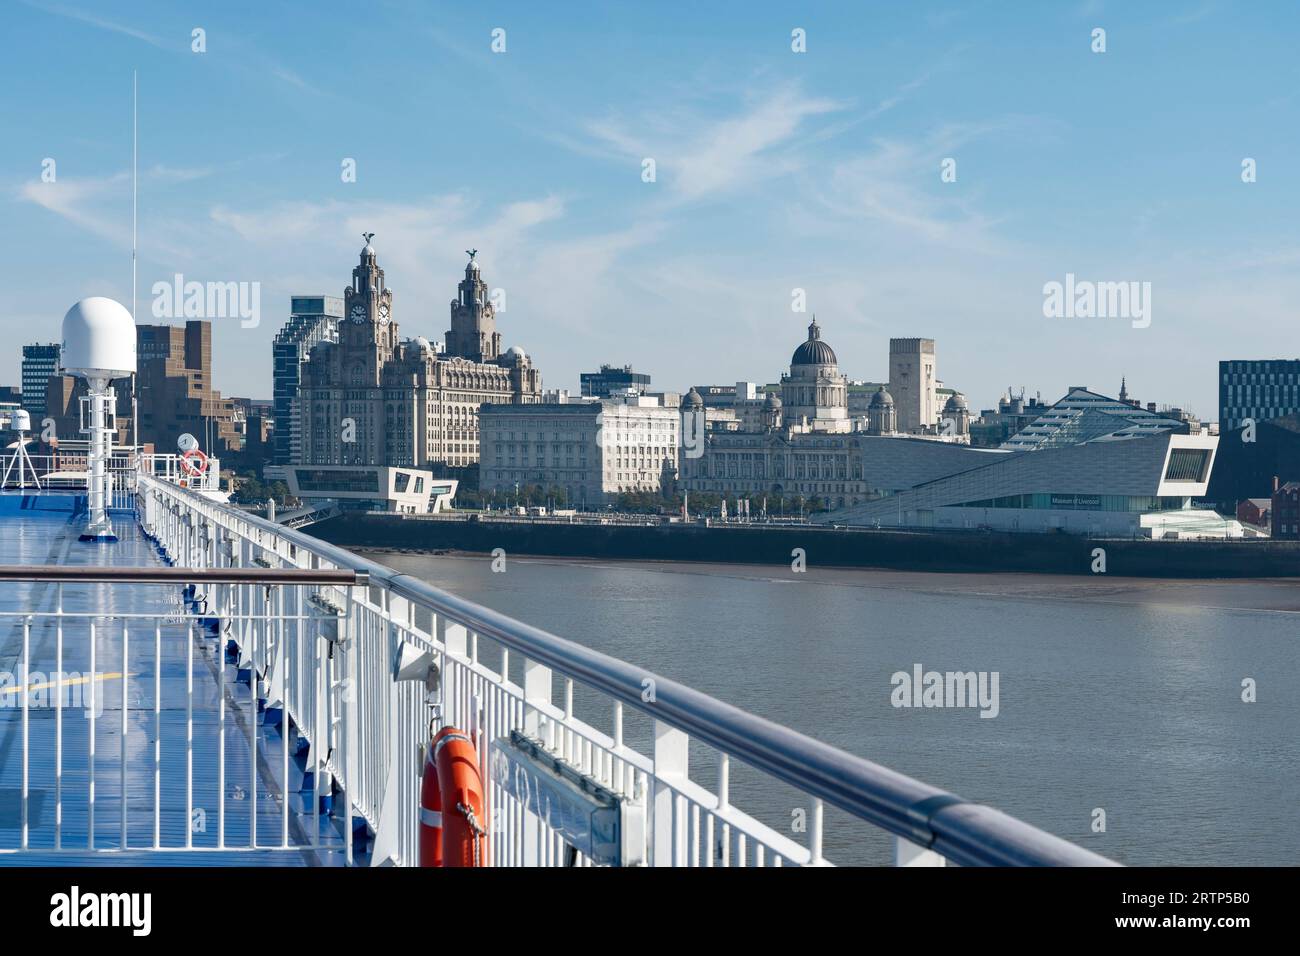 Liverpool city centre skyline from a passenger ferry on the River Mersey Stock Photo